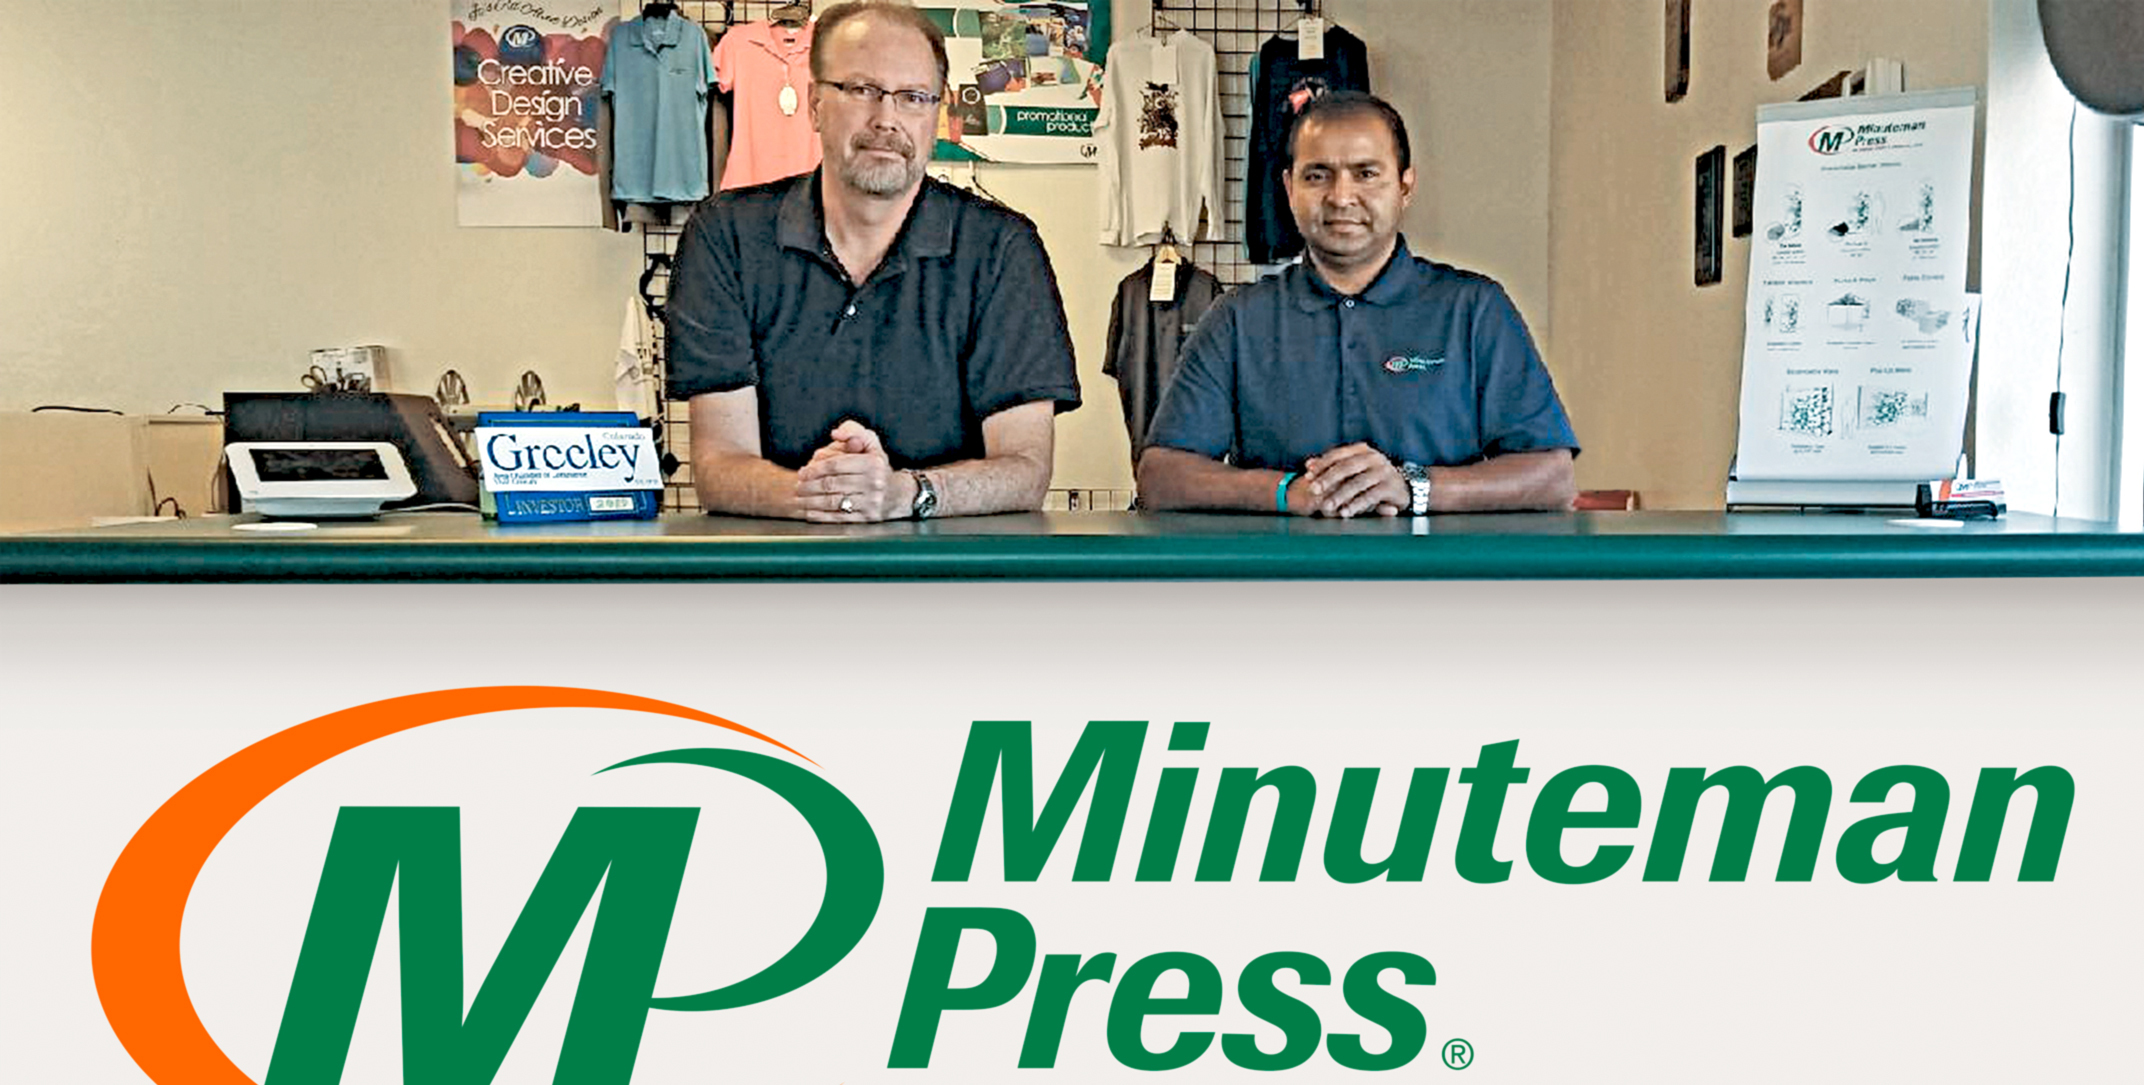 Printing Franchise - Minuteman Press Business and Marketing Services